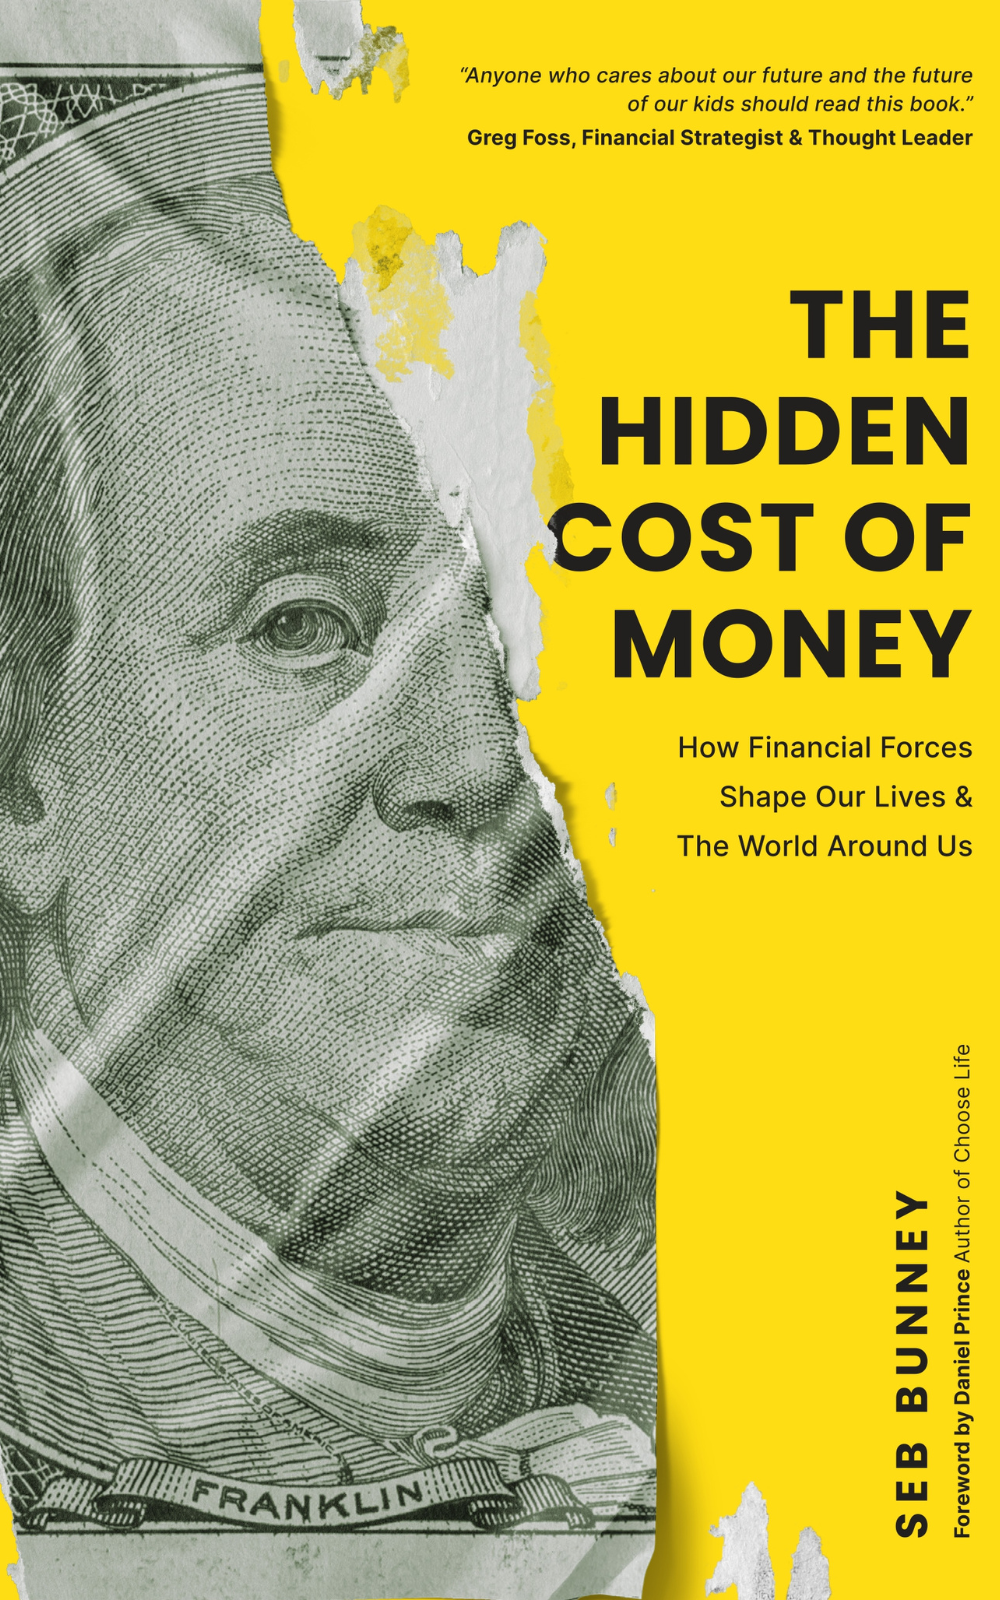 The Hidden Cost of Money: How Financial Forces Shape Our Lives & the World Around Us - fomo21